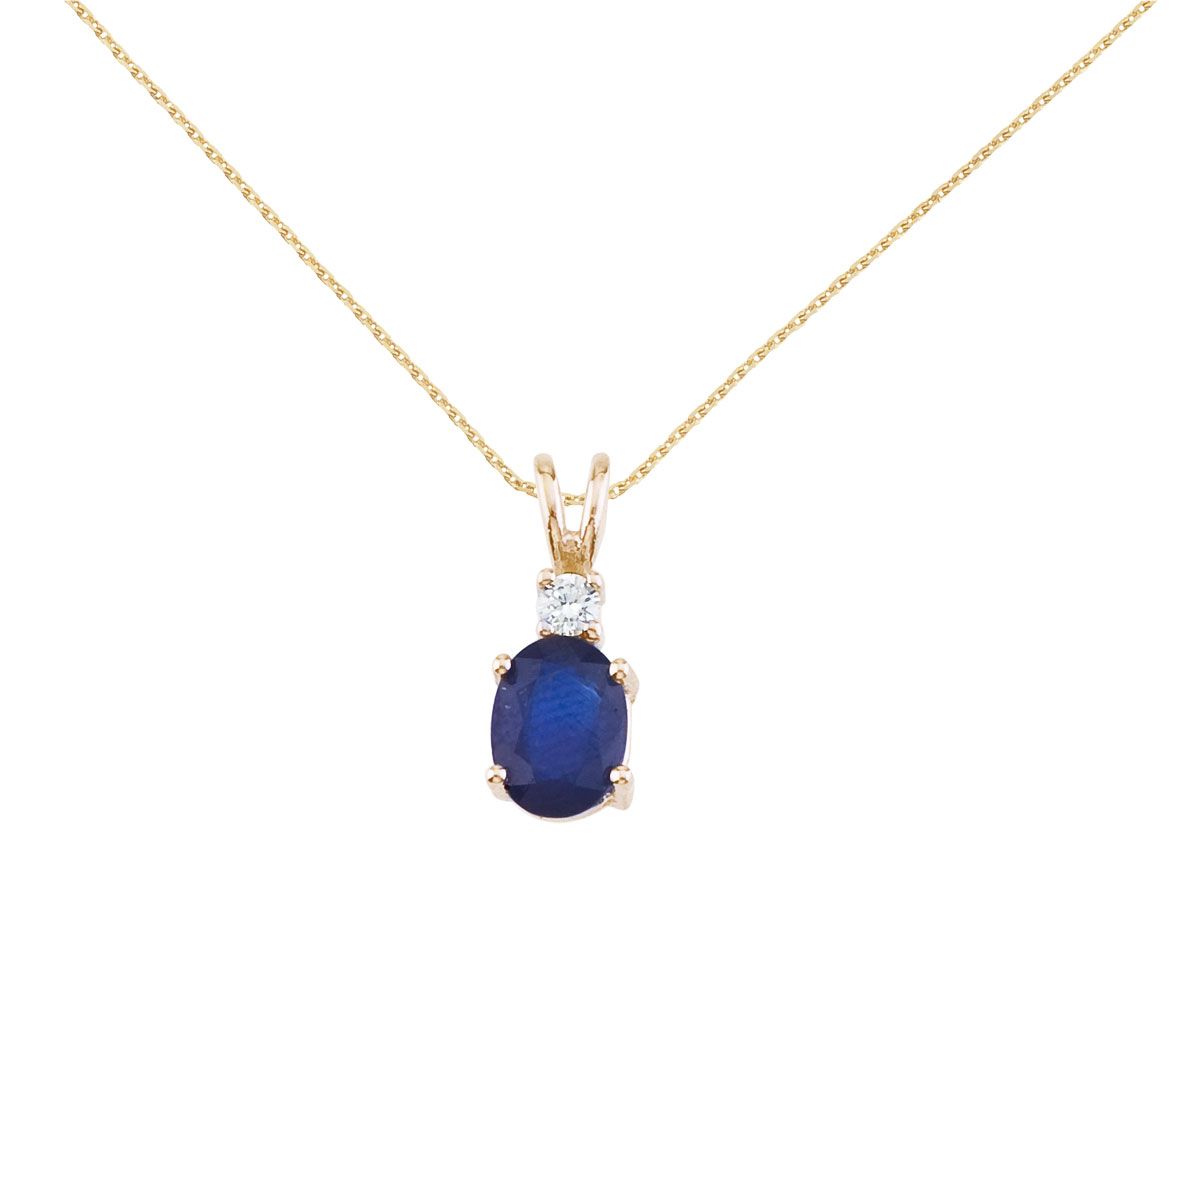 JCX2689: 7x5 mm natural sapphire and diamond pendant set in 14k yellow gold.